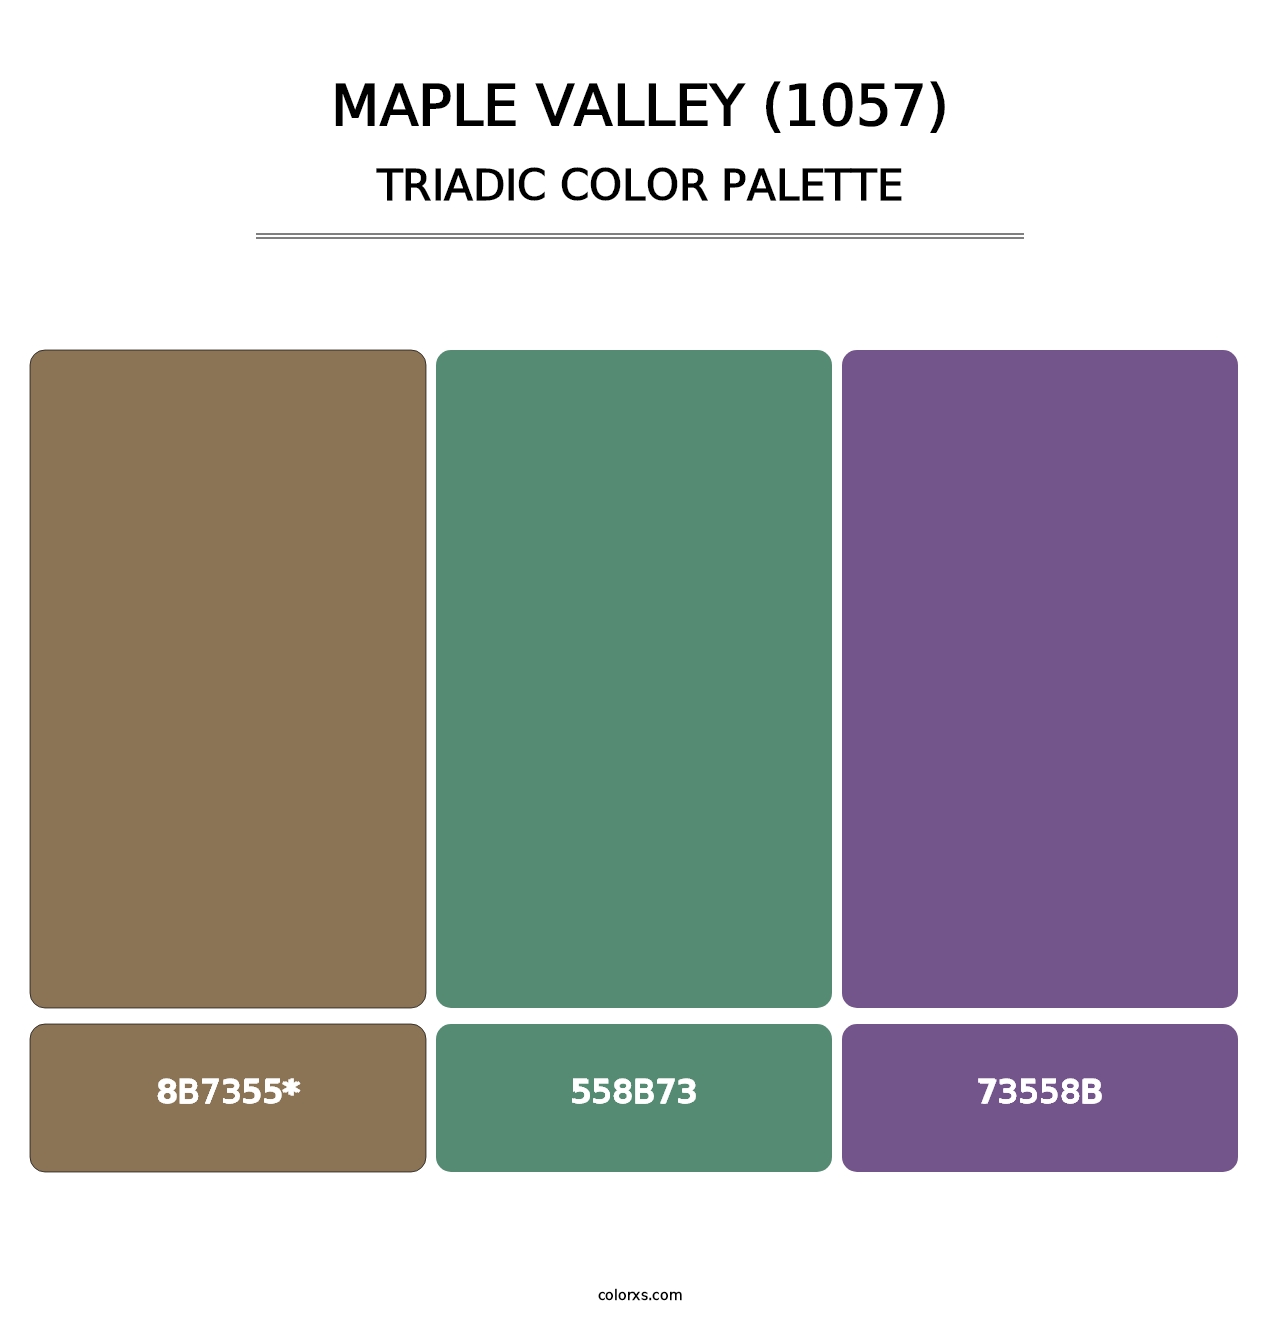 Maple Valley (1057) - Triadic Color Palette